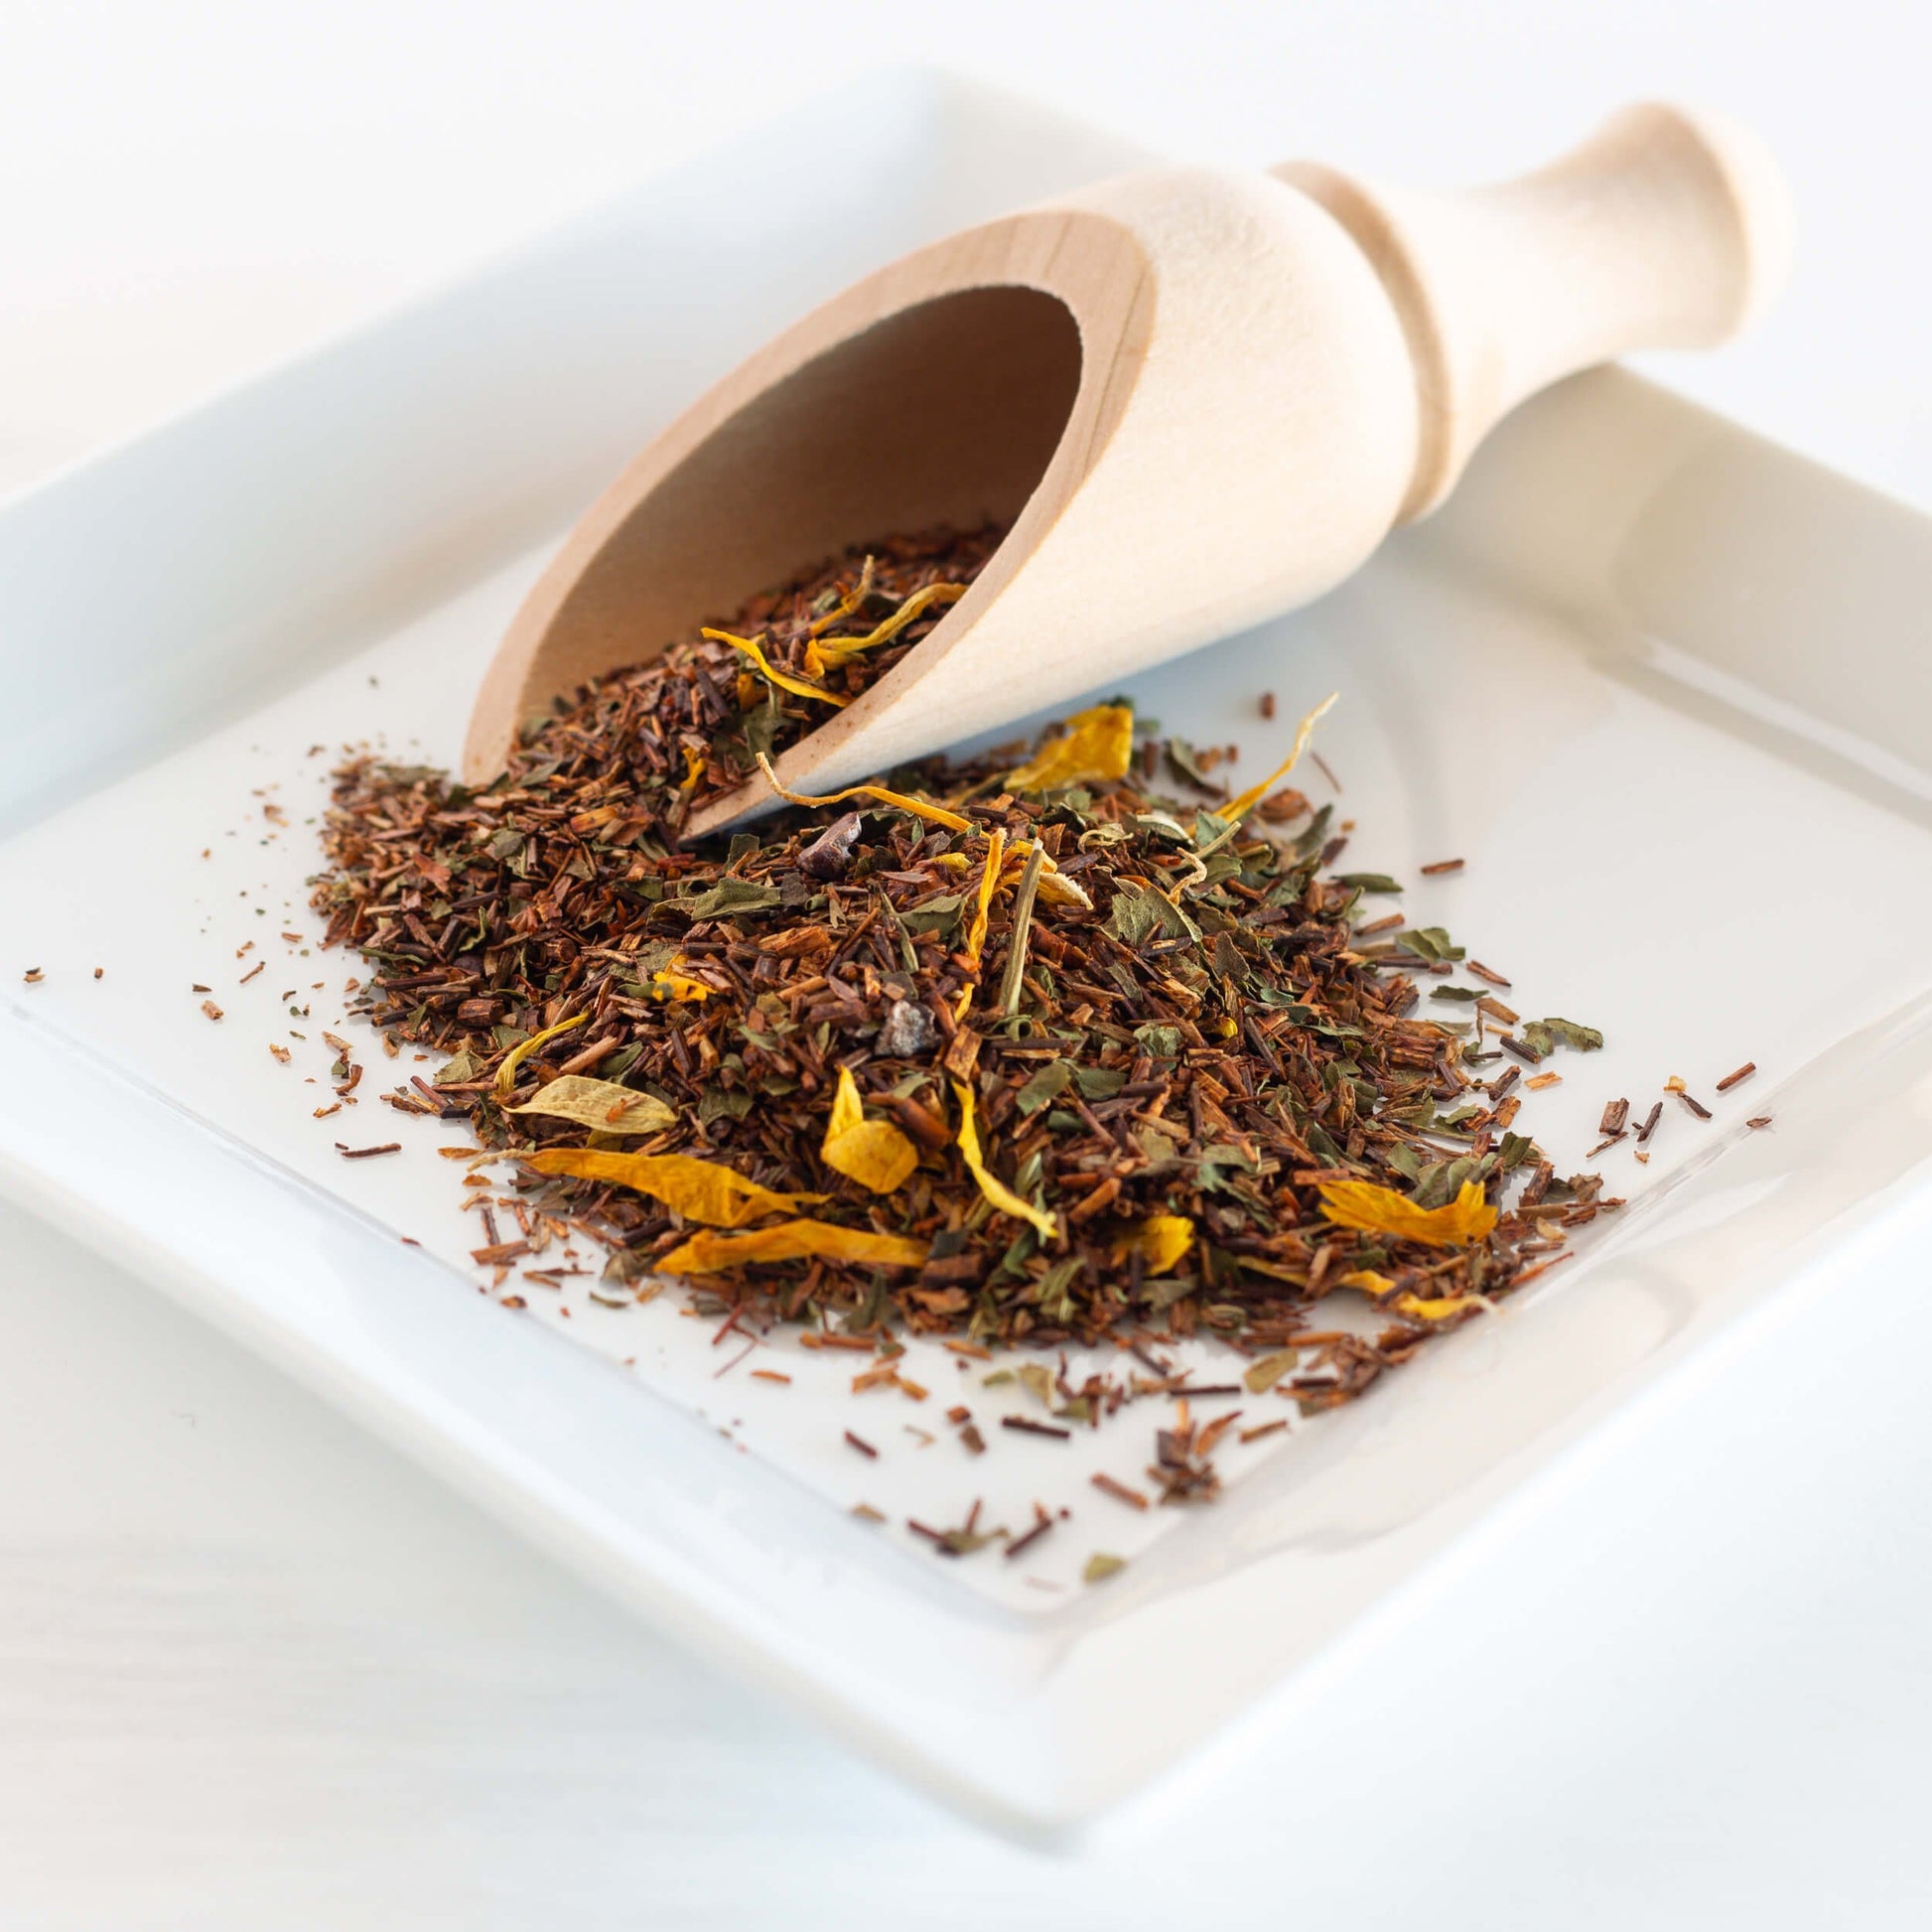 Chocolate Mint Rooibos herbal tea shown as loose tea leaves spilling from a wooden scoop on a square white plate